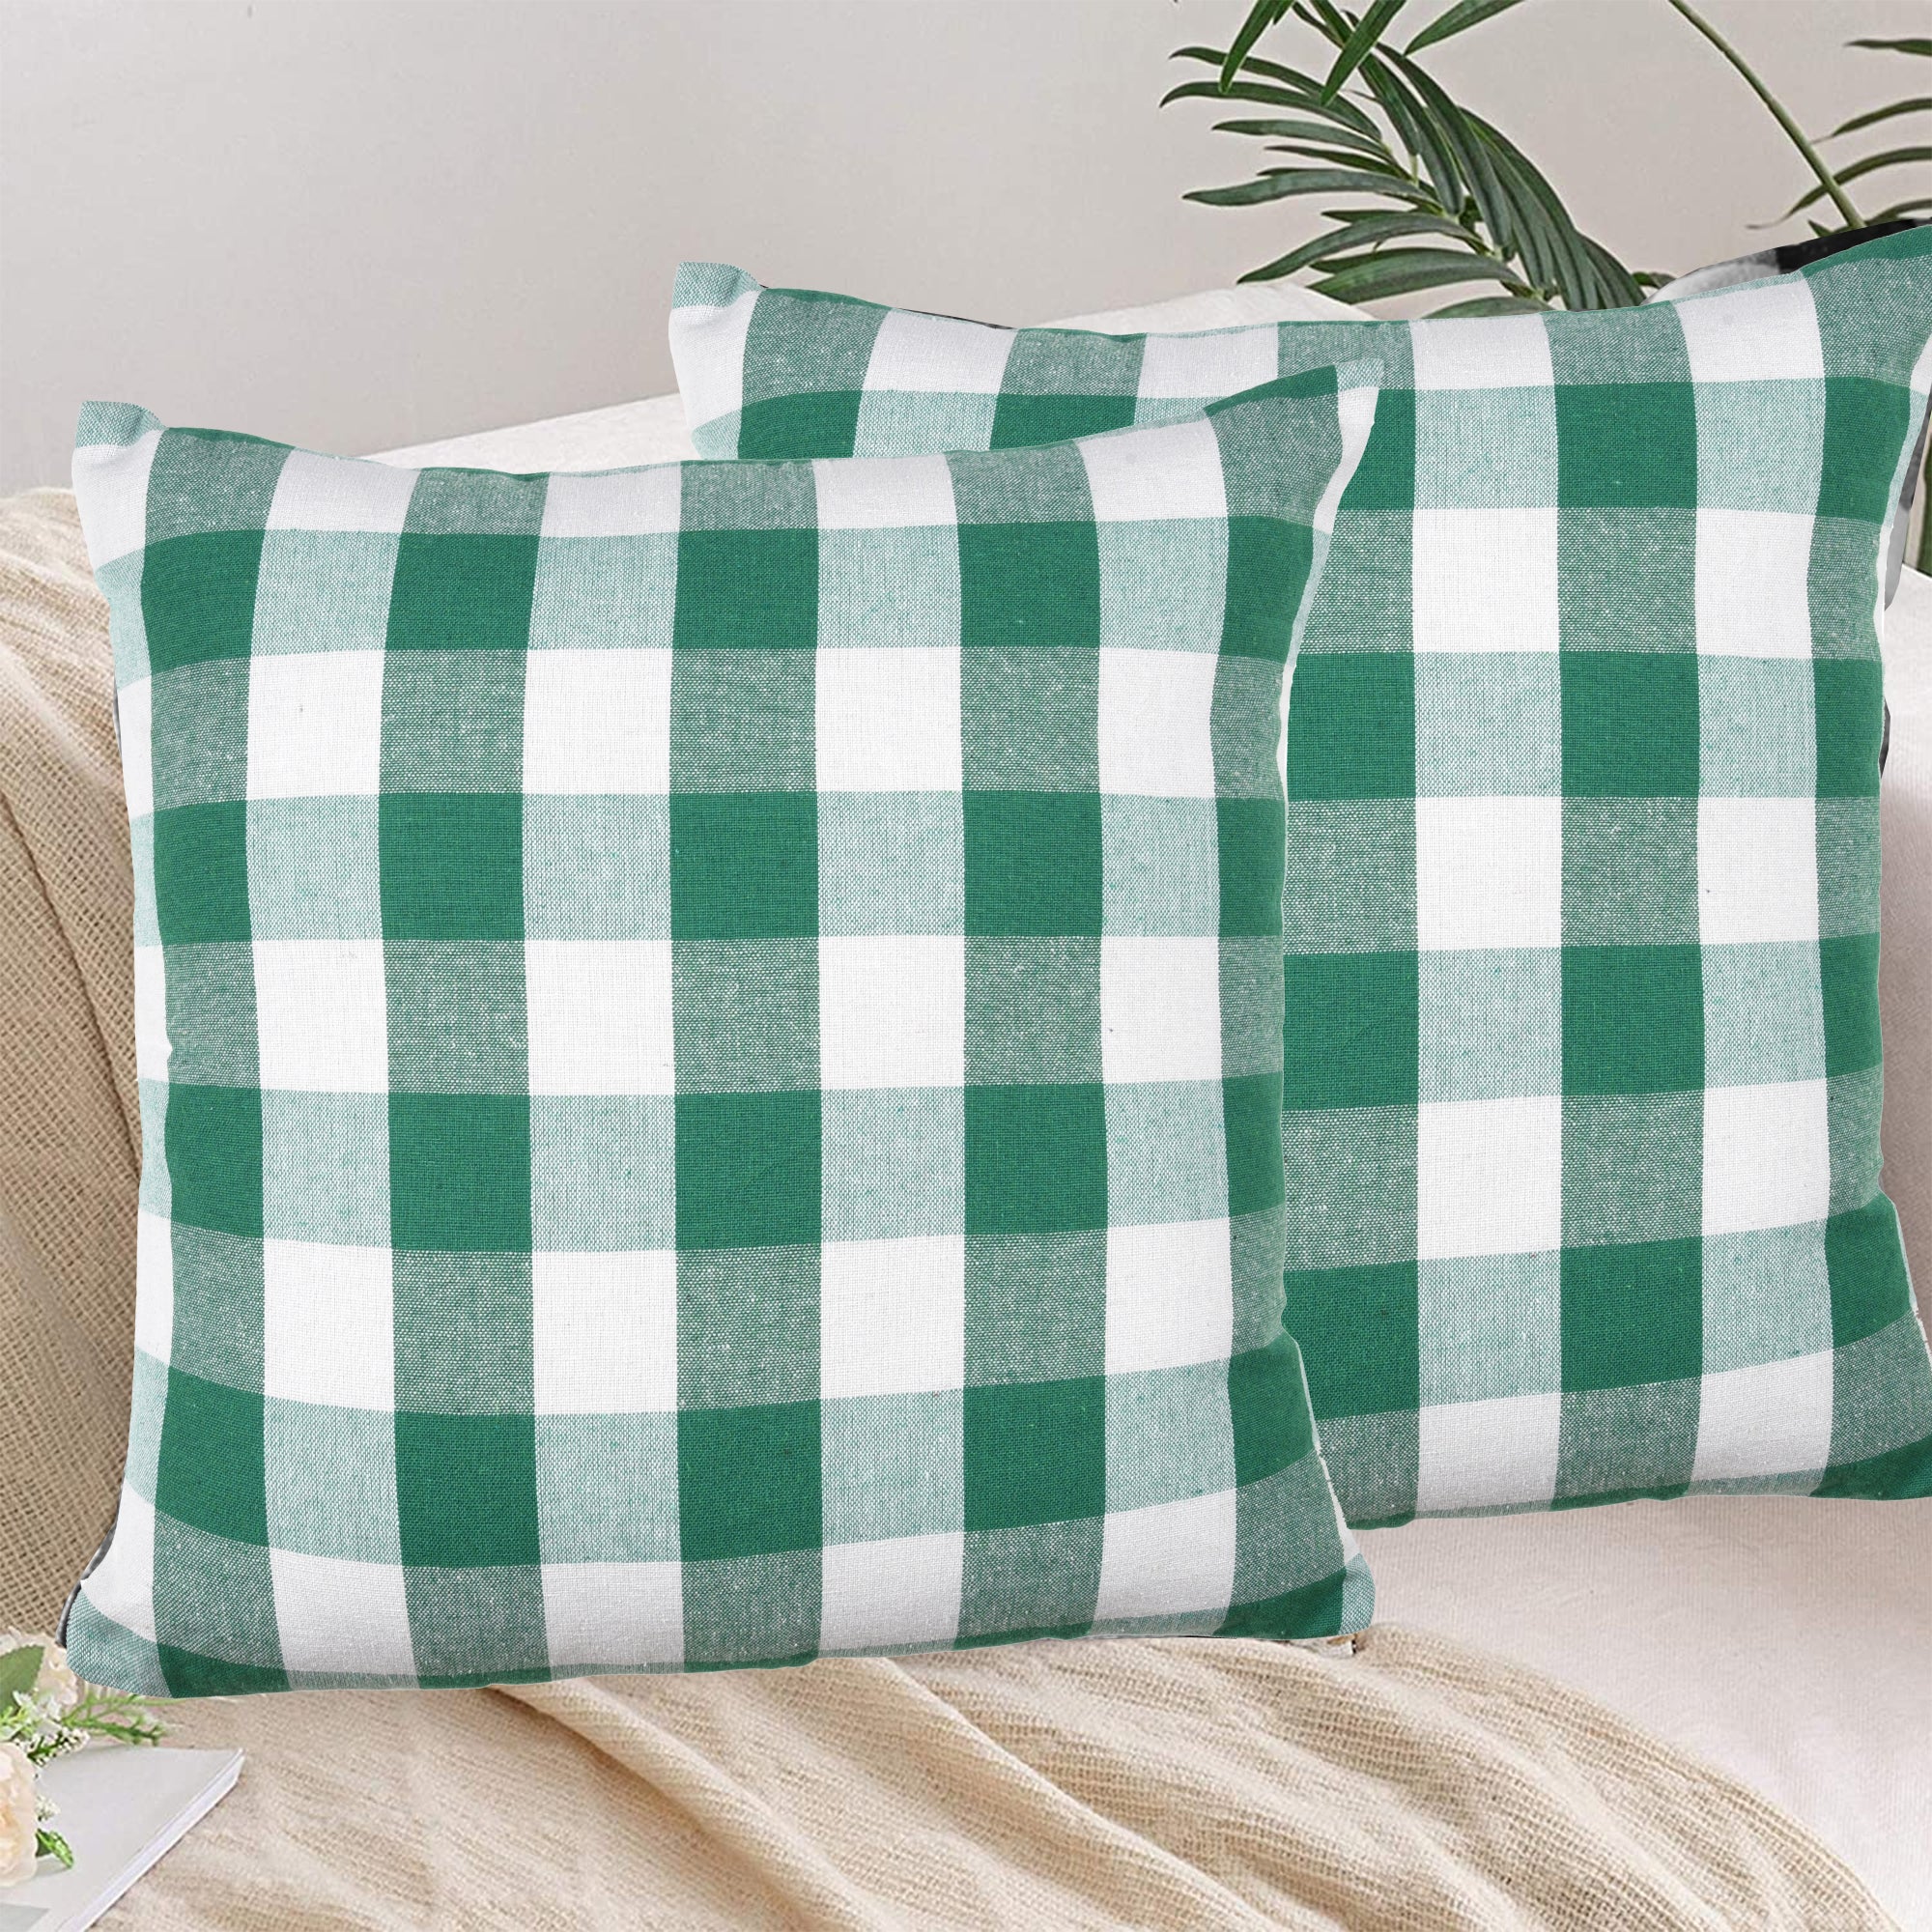 Lushomes Square Cushion Cover, Cotton Sofa Pillow Cover set of 4, 16x16 Inch, Big Checks, Green and White Checks, Pillow Cushions Covers (Pack of 4, 40x40 Cms)